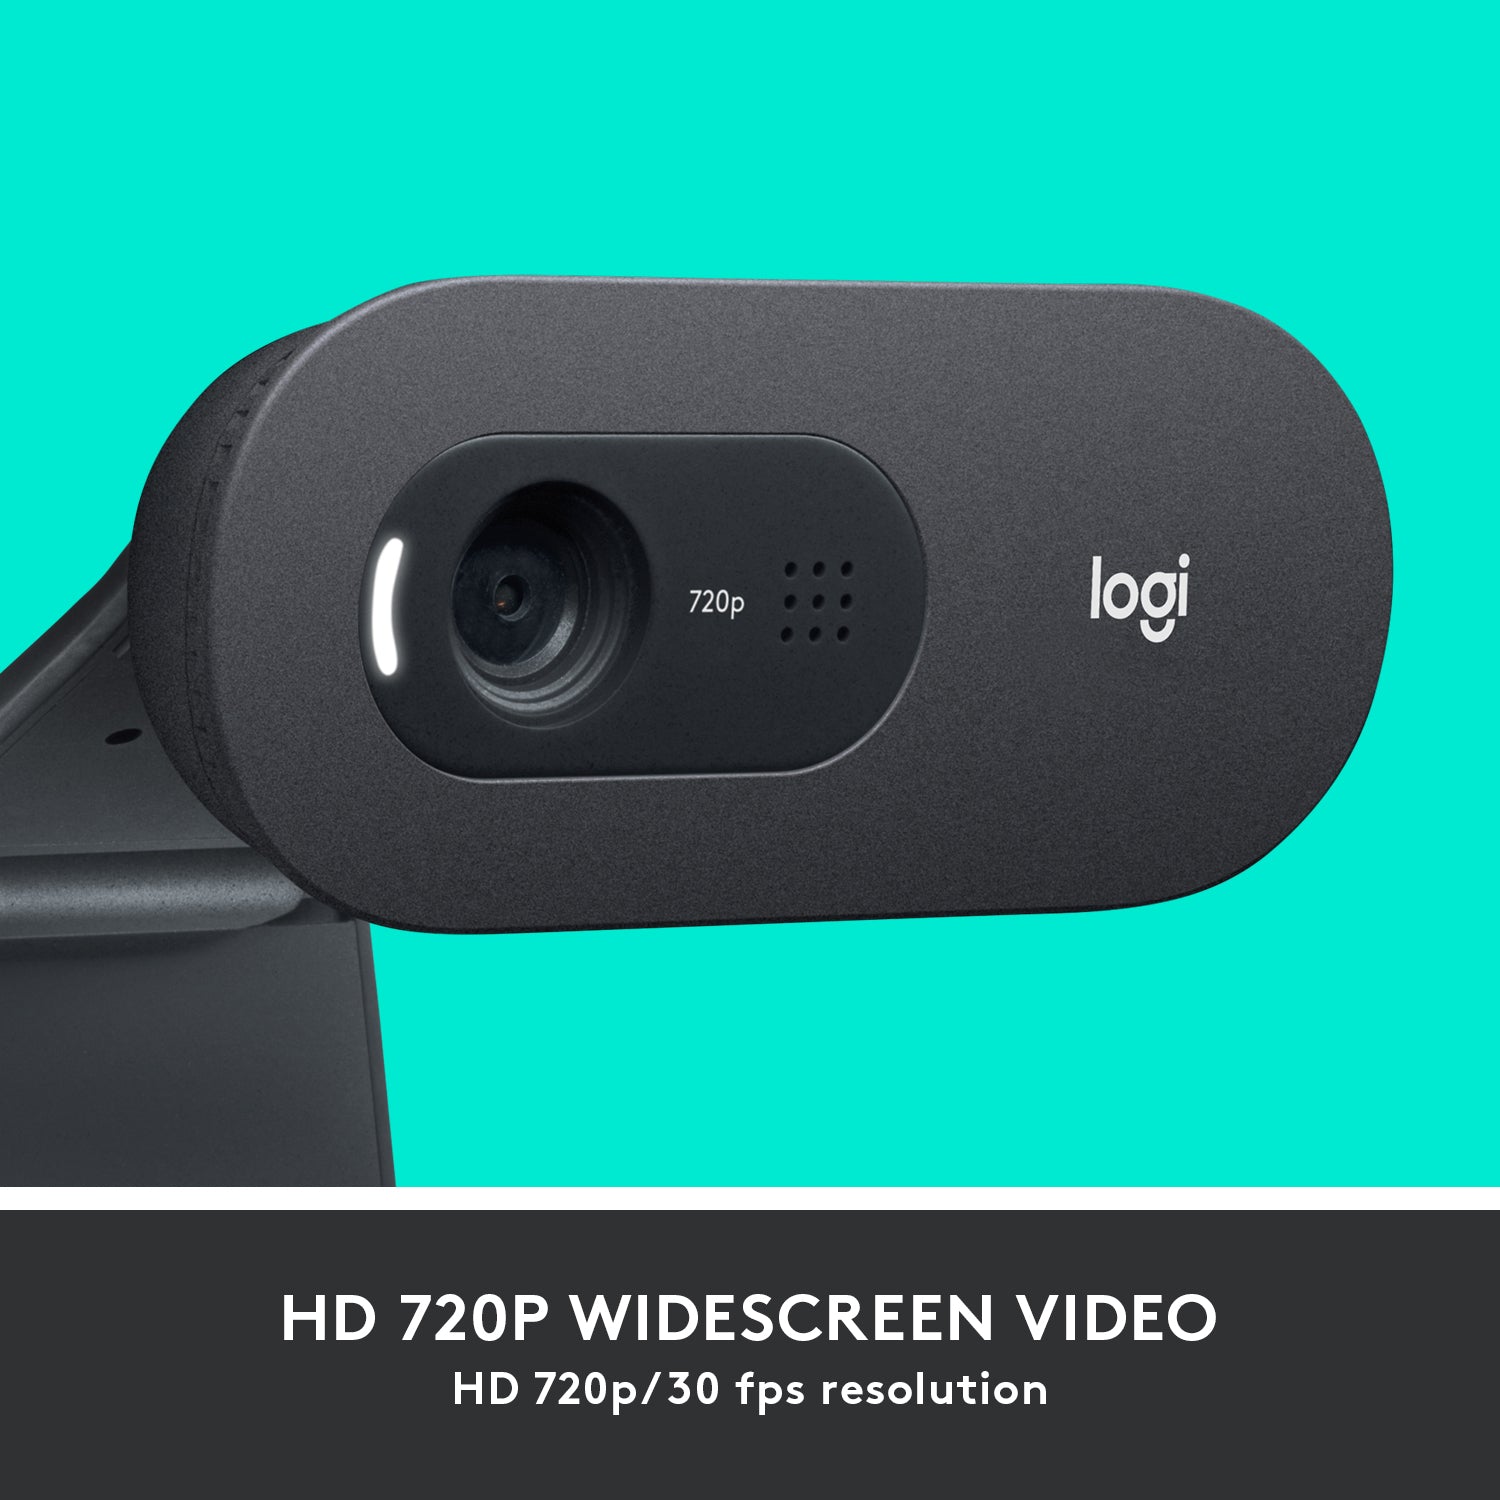 Logitech C505 HD Webcam - 720p HD External USB Camera for Desktop or Laptop with Long-Range Microphone, Compatible with PC or Mac - Grey